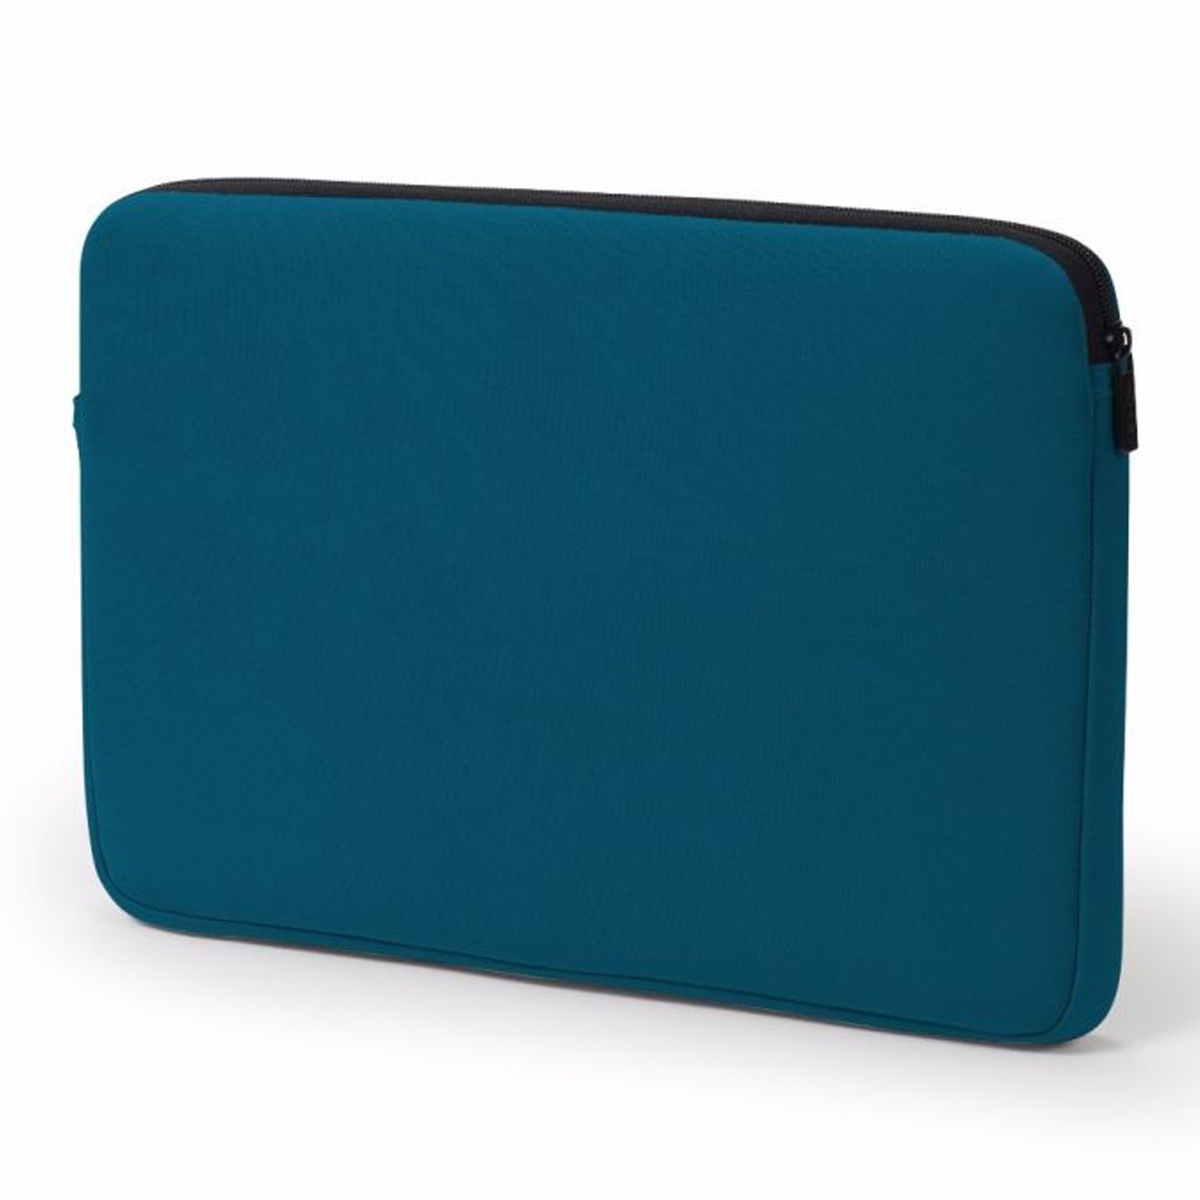 Dicota Laptop Sleeve, Base, 14.1 inches, Assorted, D31292